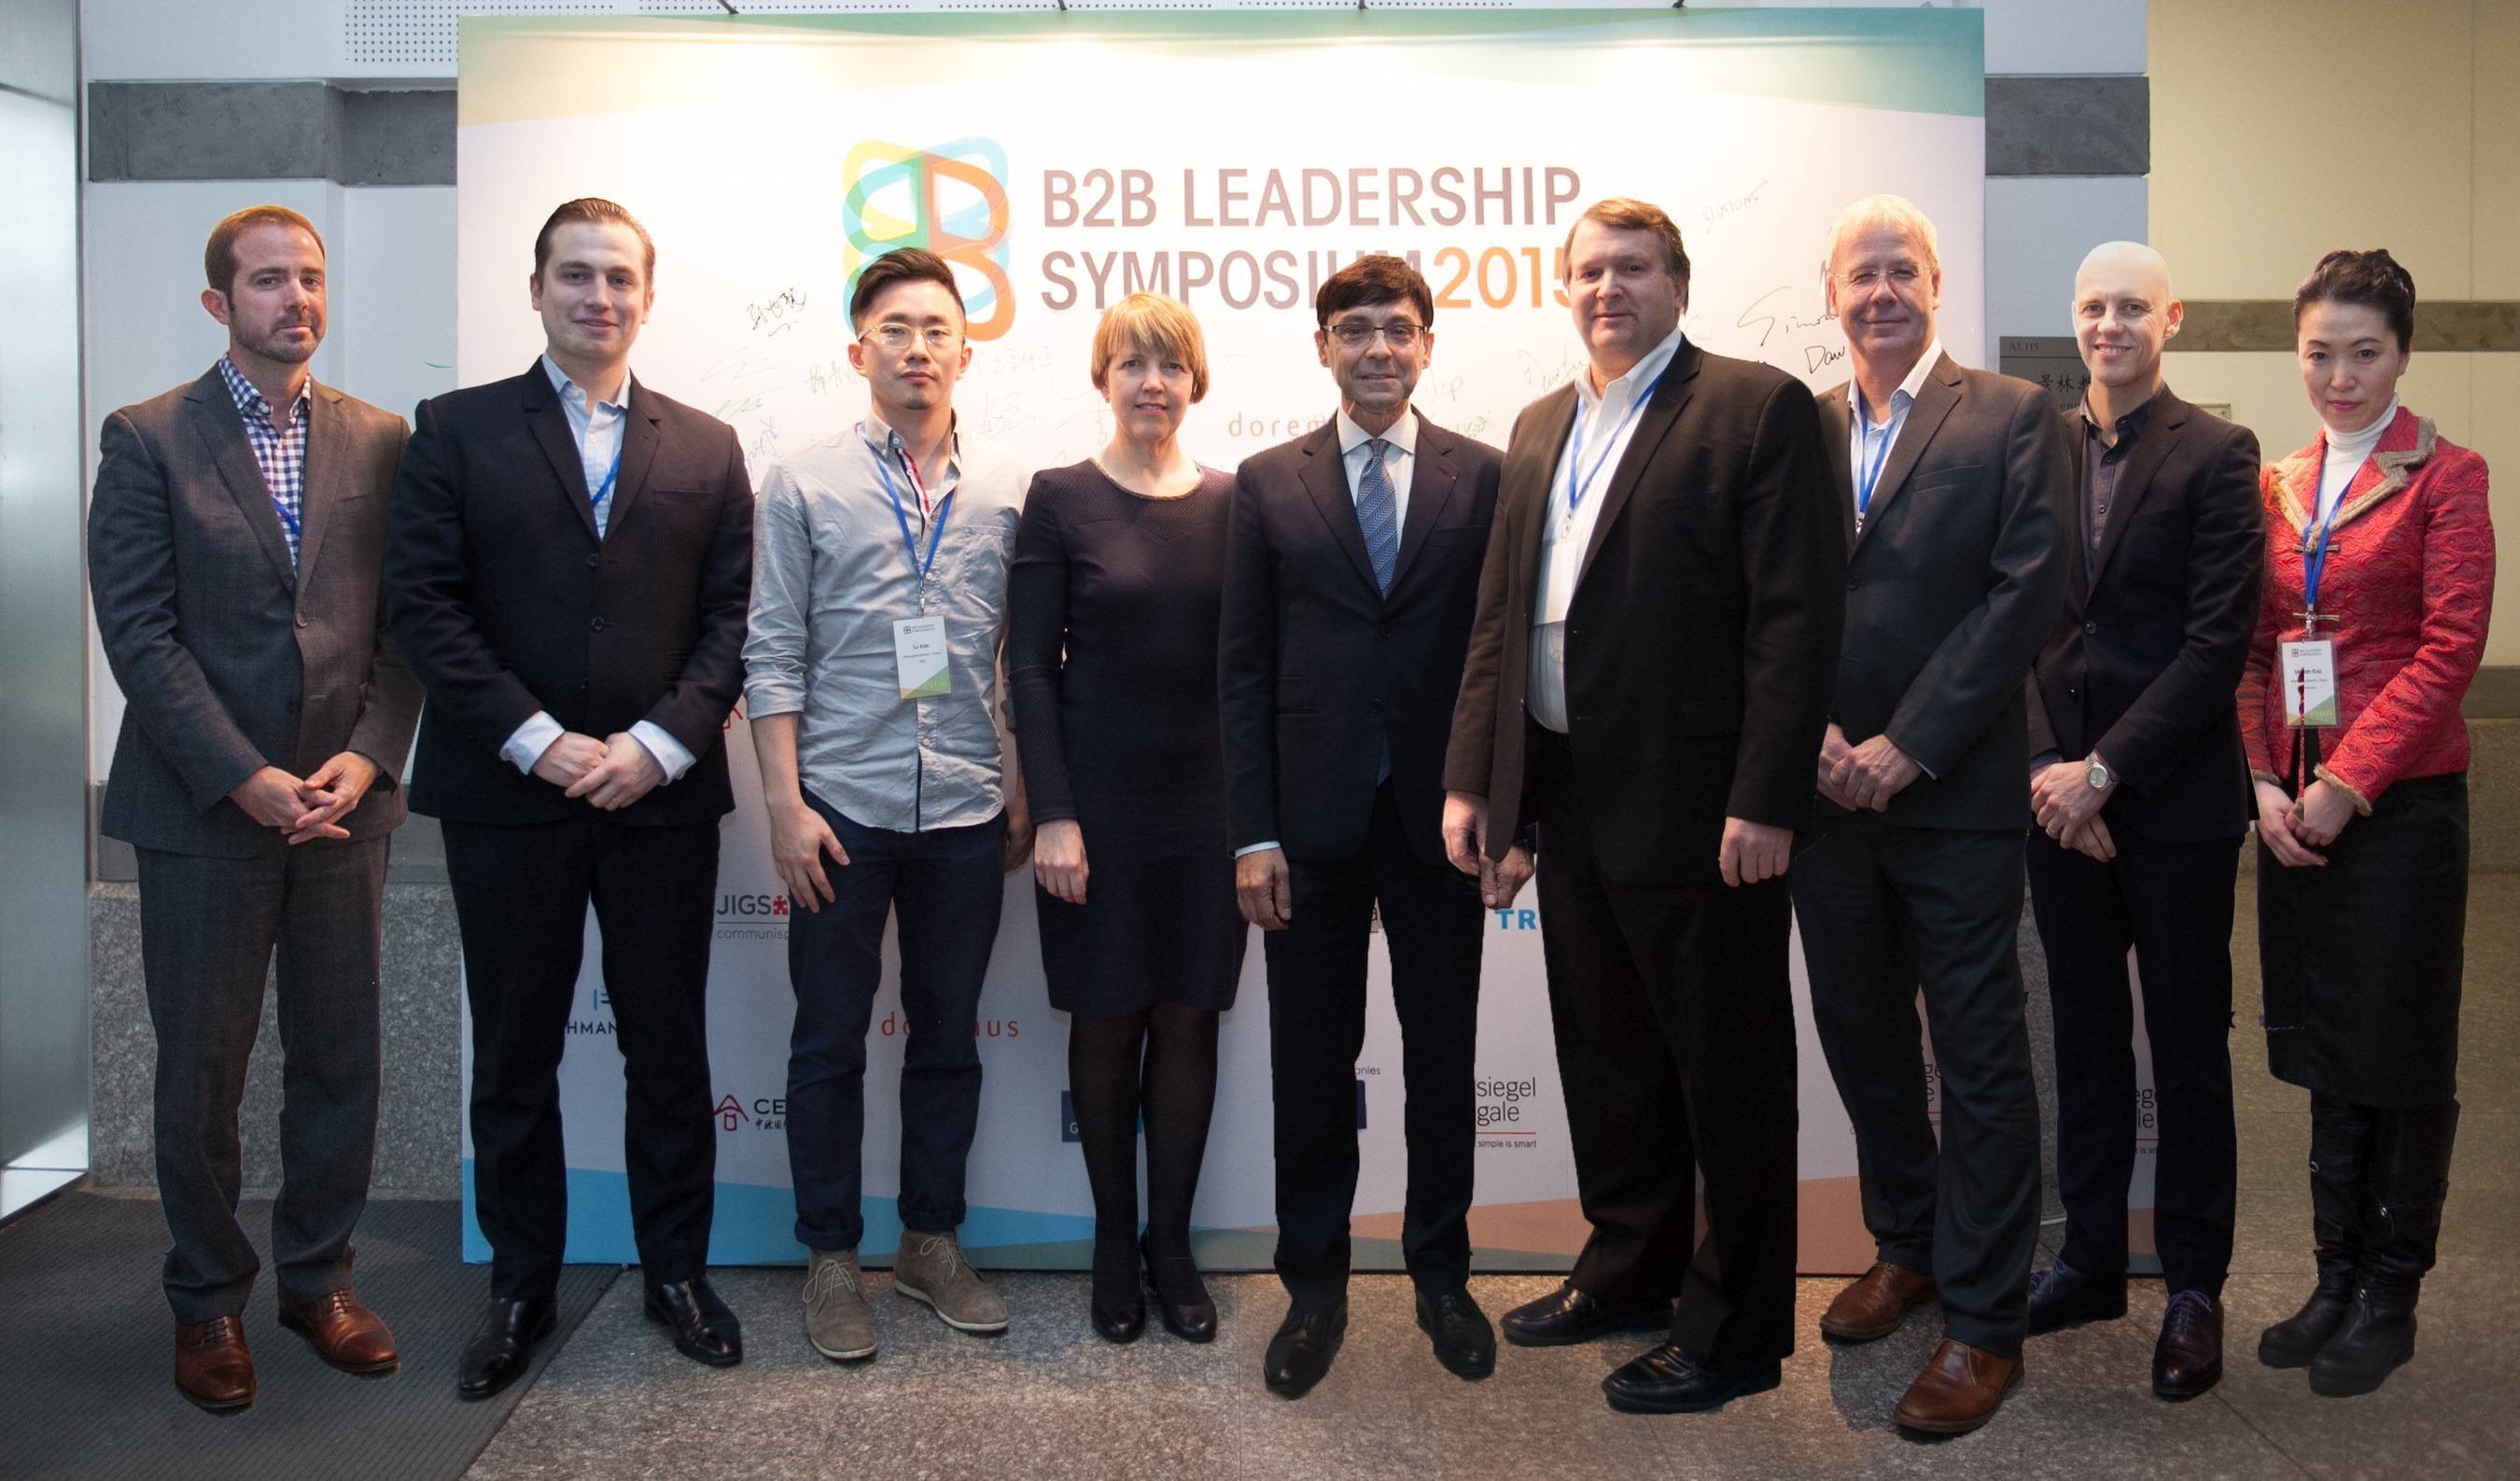 Omnicom agencies urged companies to adopt innovative thinking and engage audiences in meaningful ways across multiple communication platforms at the B2B Leadership Symposium 2015.